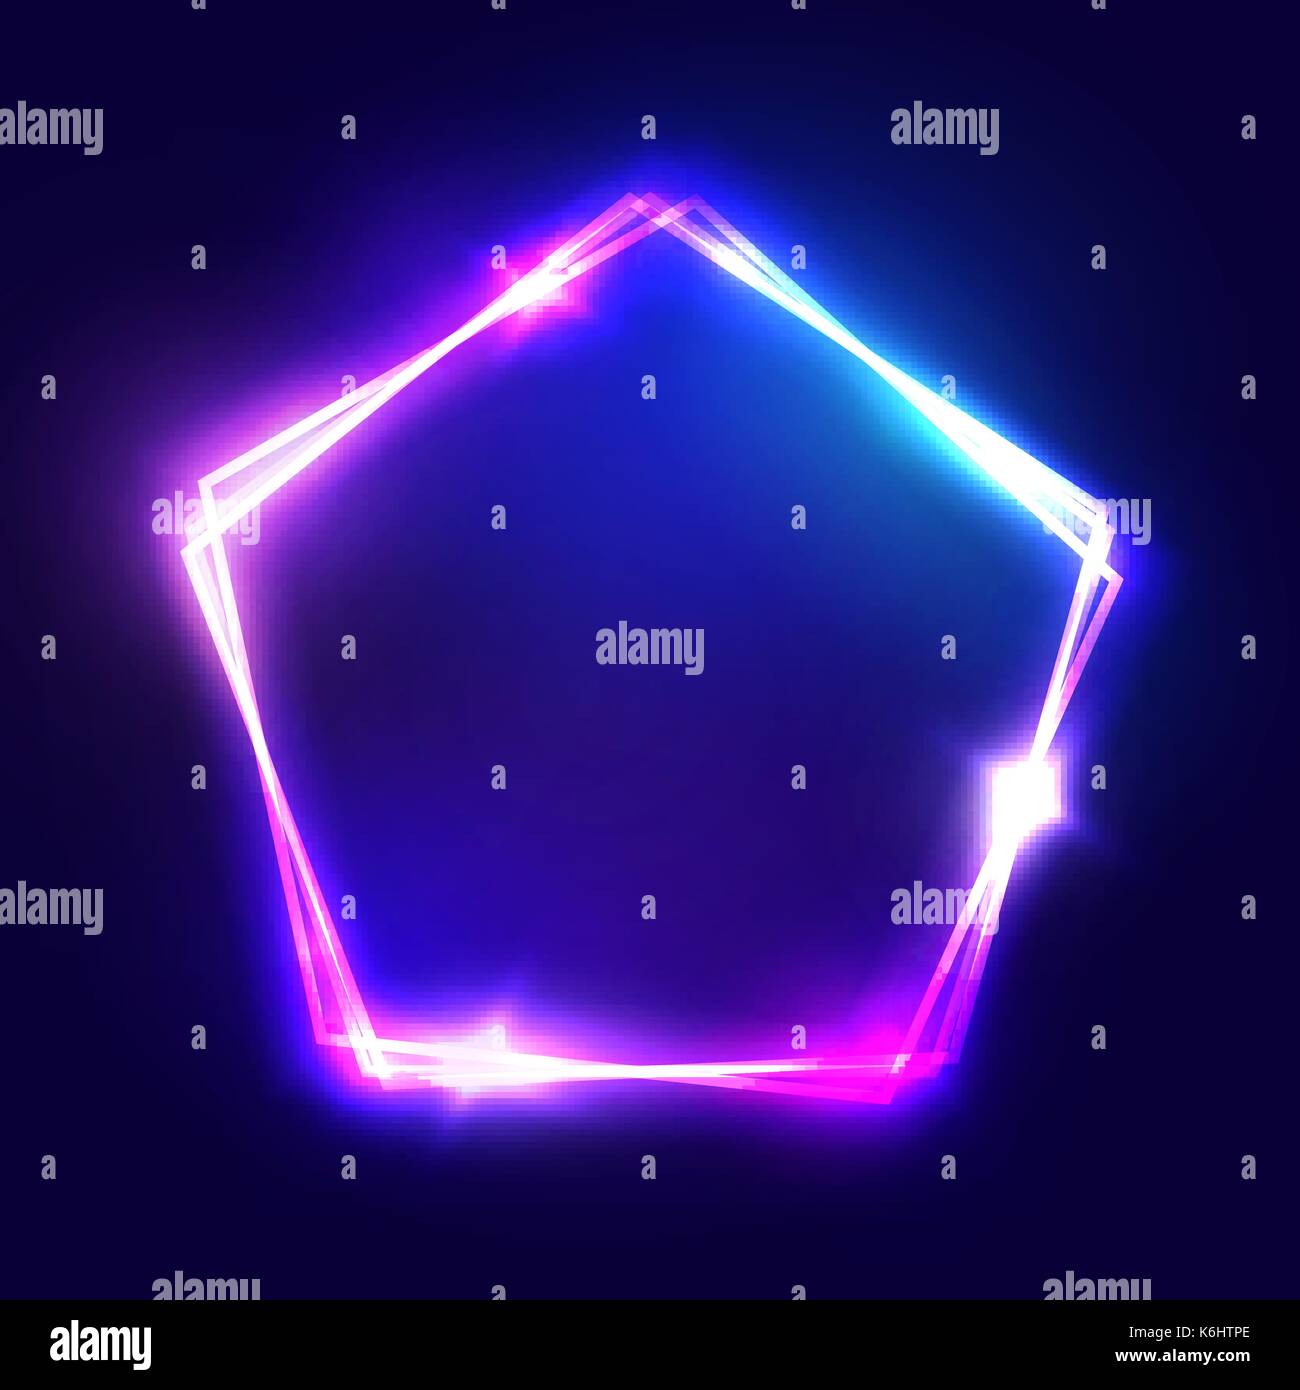 Abstract neon pentagon electric frame. Night Club Sign. 3d Retro Light Signboard With Shining Neon Effect. Techno Frame With Glowing On Dark Blue Backdrop. Colorful Vector Illustration in 80s Style. Stock Vector